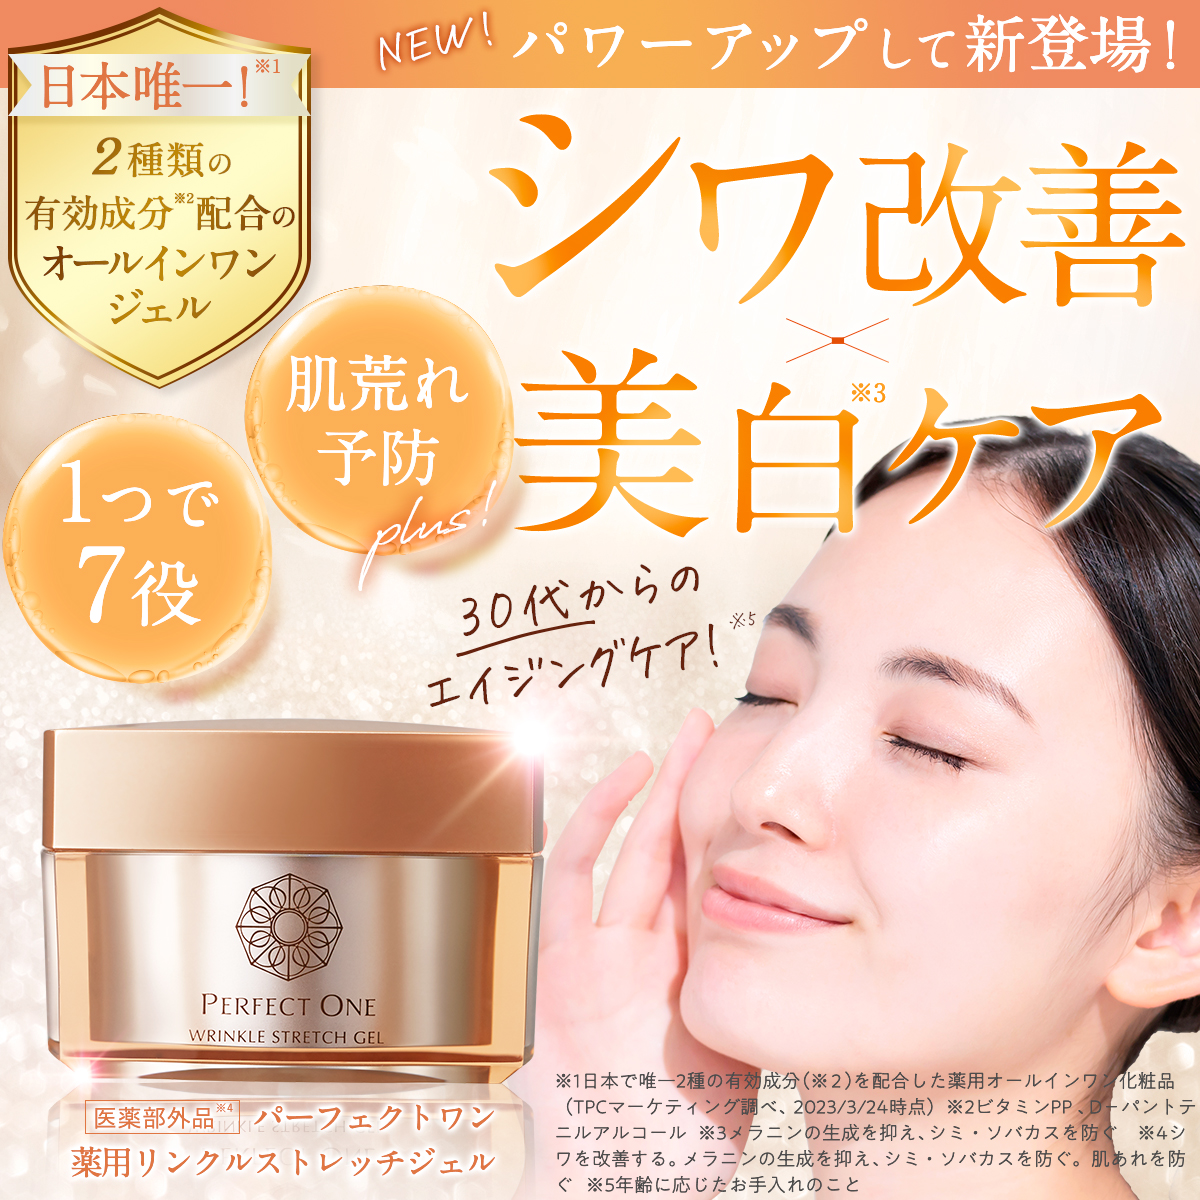  all-in-one gel Perfect one medicine for link ru stretch gel 50g ( packing change .2 piece ) new made in Japan medicine official face lotion beautiful white wrinkle improvement neck cream vitamin PP